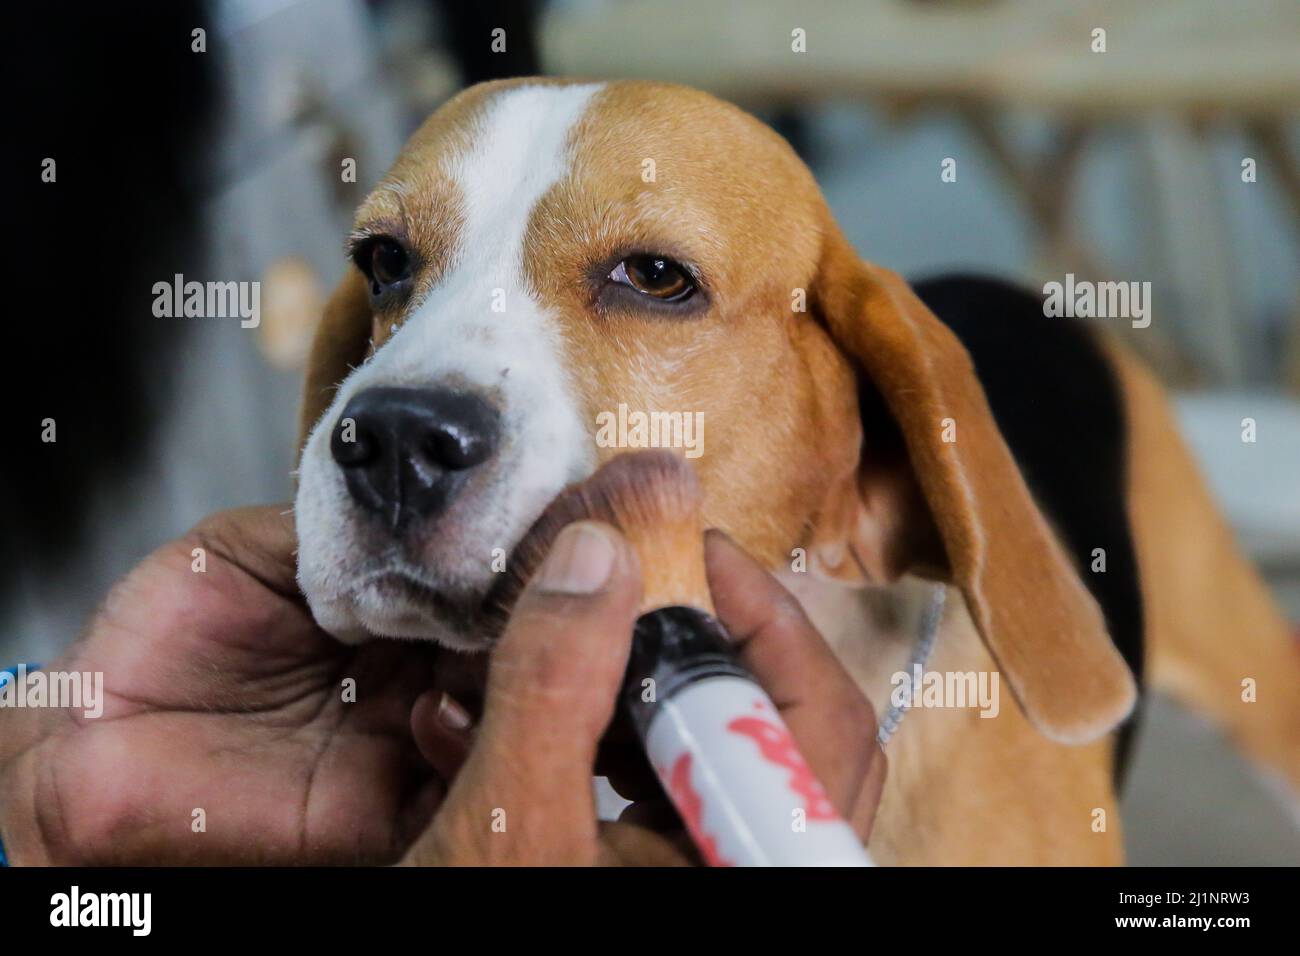 Marikina City. 27th Mar, 2022. A dog is groomed during the annual All-Breed Championship Dog Show in Marikina City, the Philippines on March 27, 2022. Hundreds of dogs of various breeds competed in the All-Breed Championship Dog Show here Sunday. Credit: Rouelle Umali/Xinhua/Alamy Live News Stock Photo